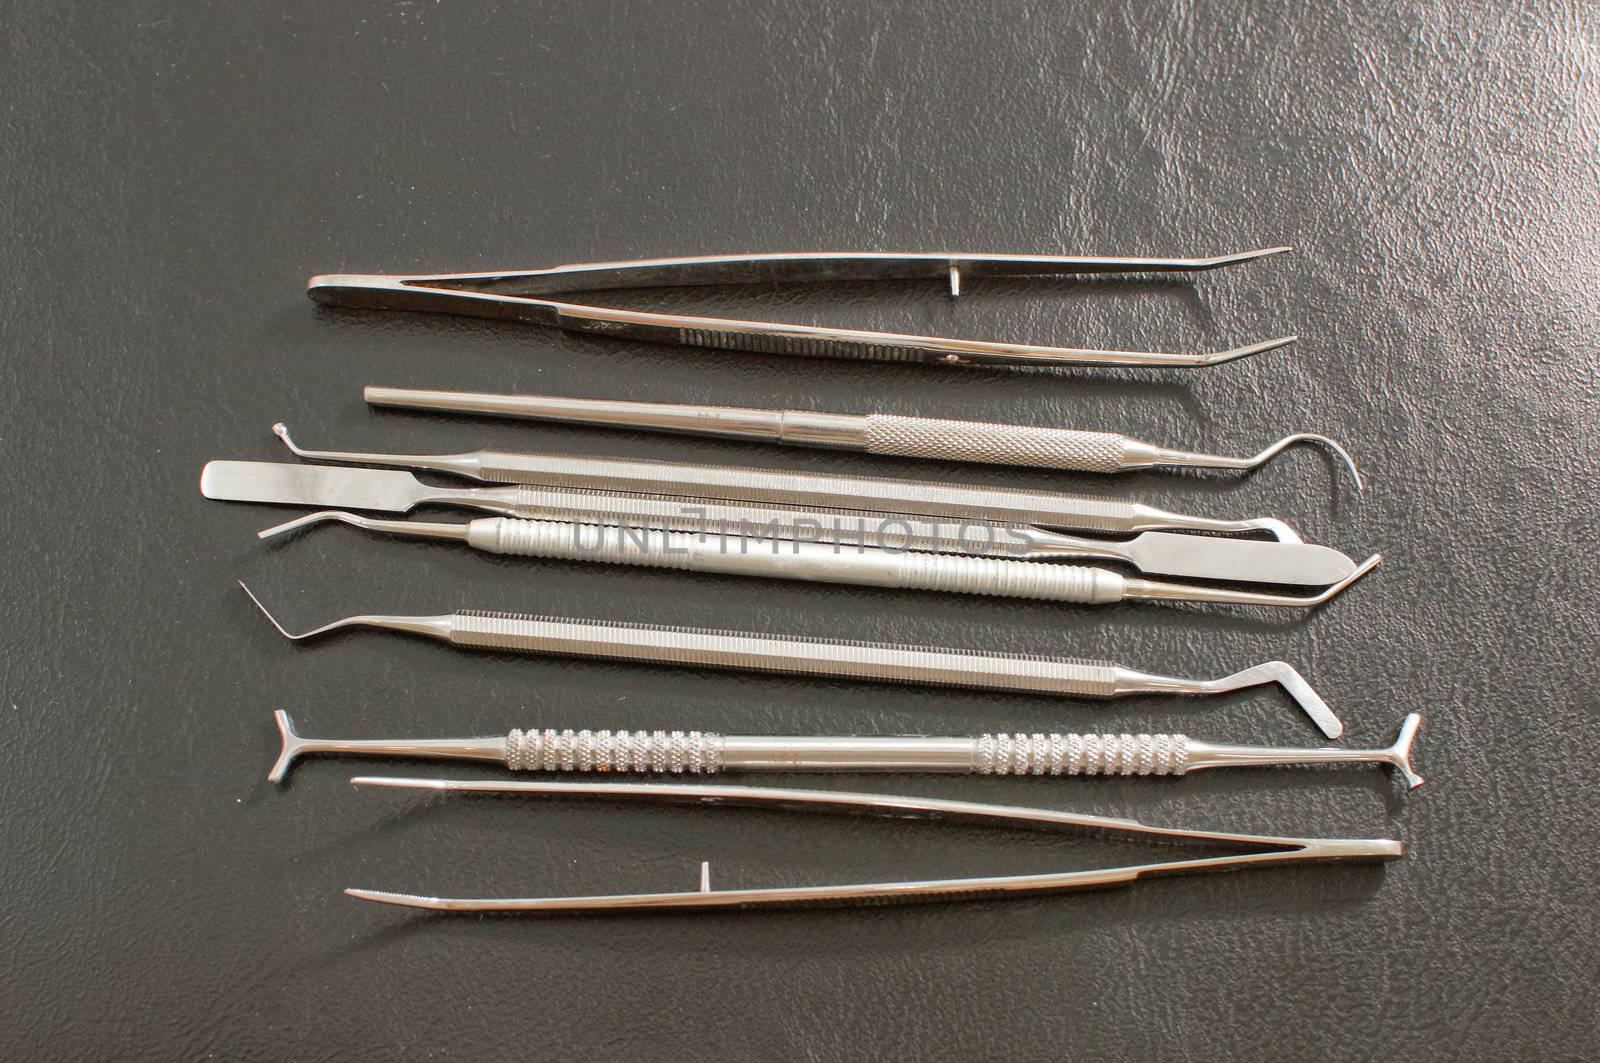 Set of dental care instruments . by LarisaP